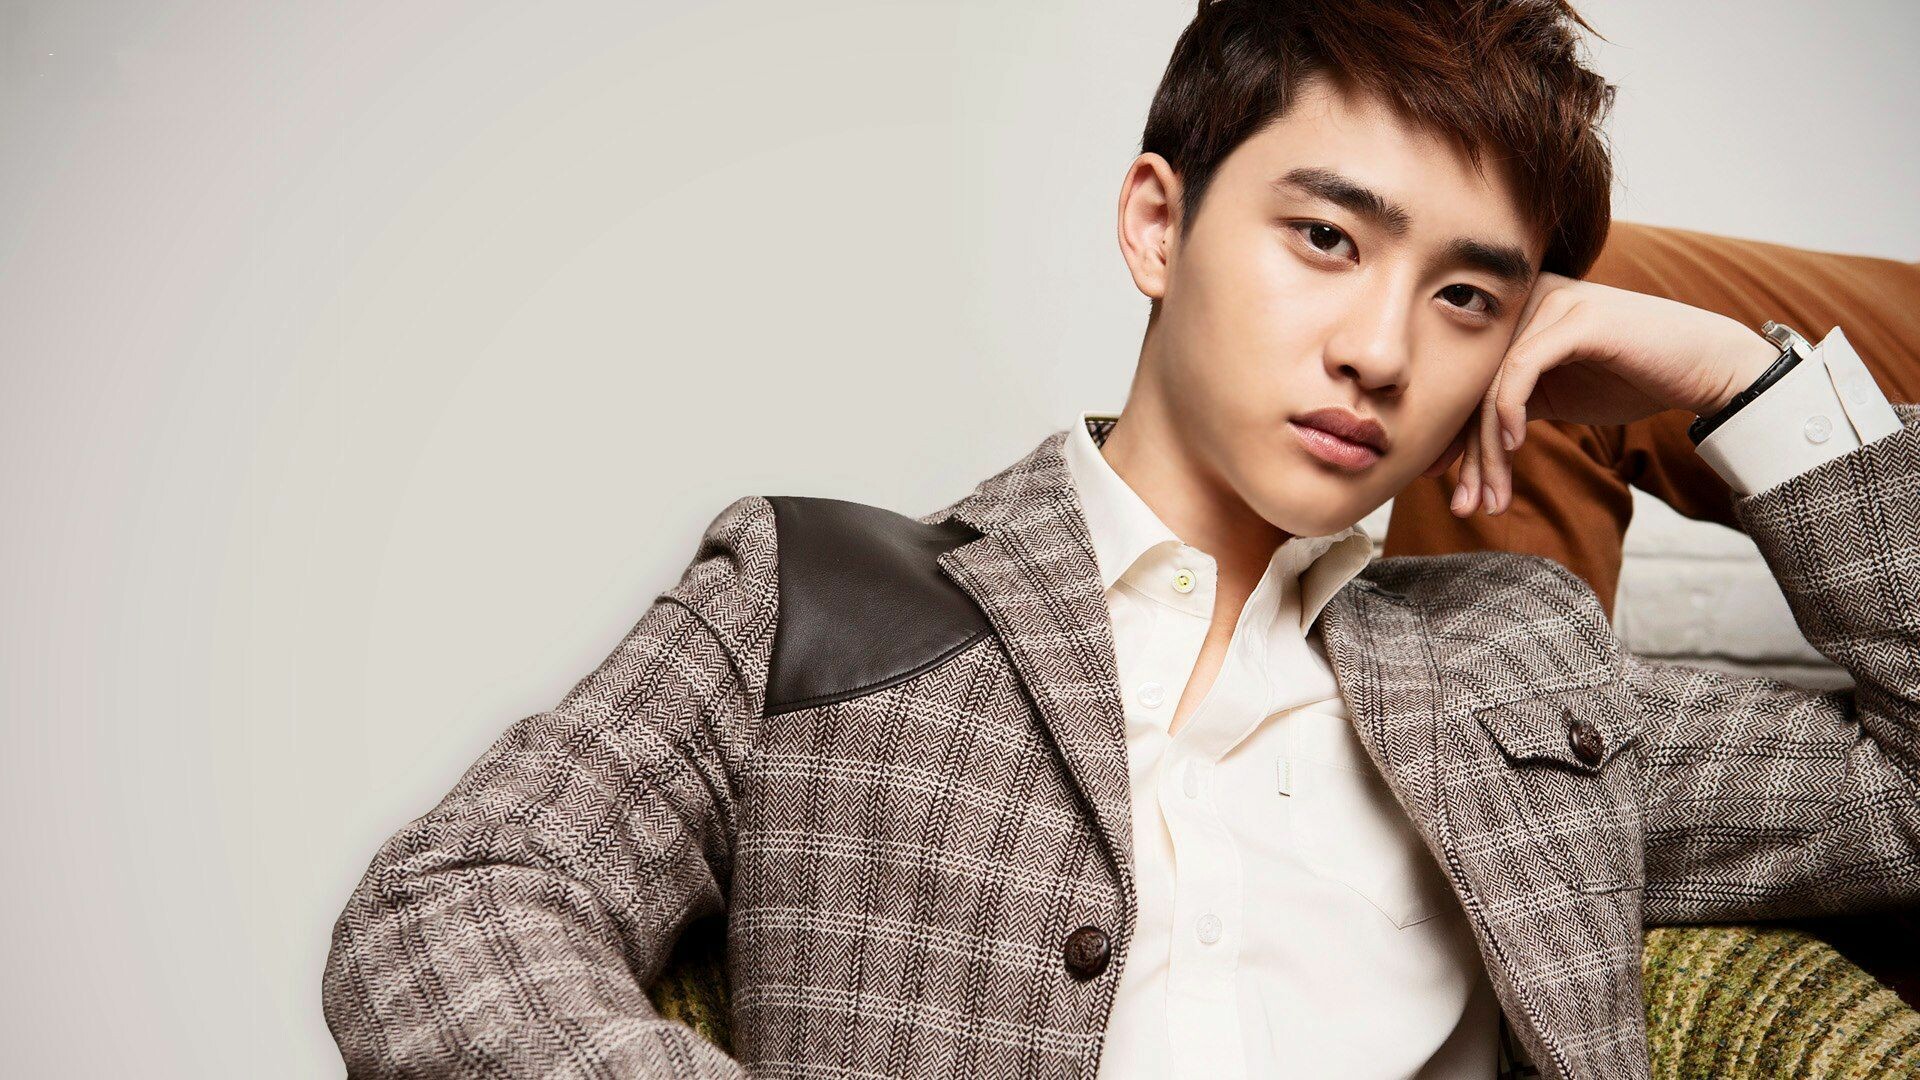 EXO: D.O., debuted in 2021as a soloist with his first extended play, Empathy. 1920x1080 Full HD Wallpaper.